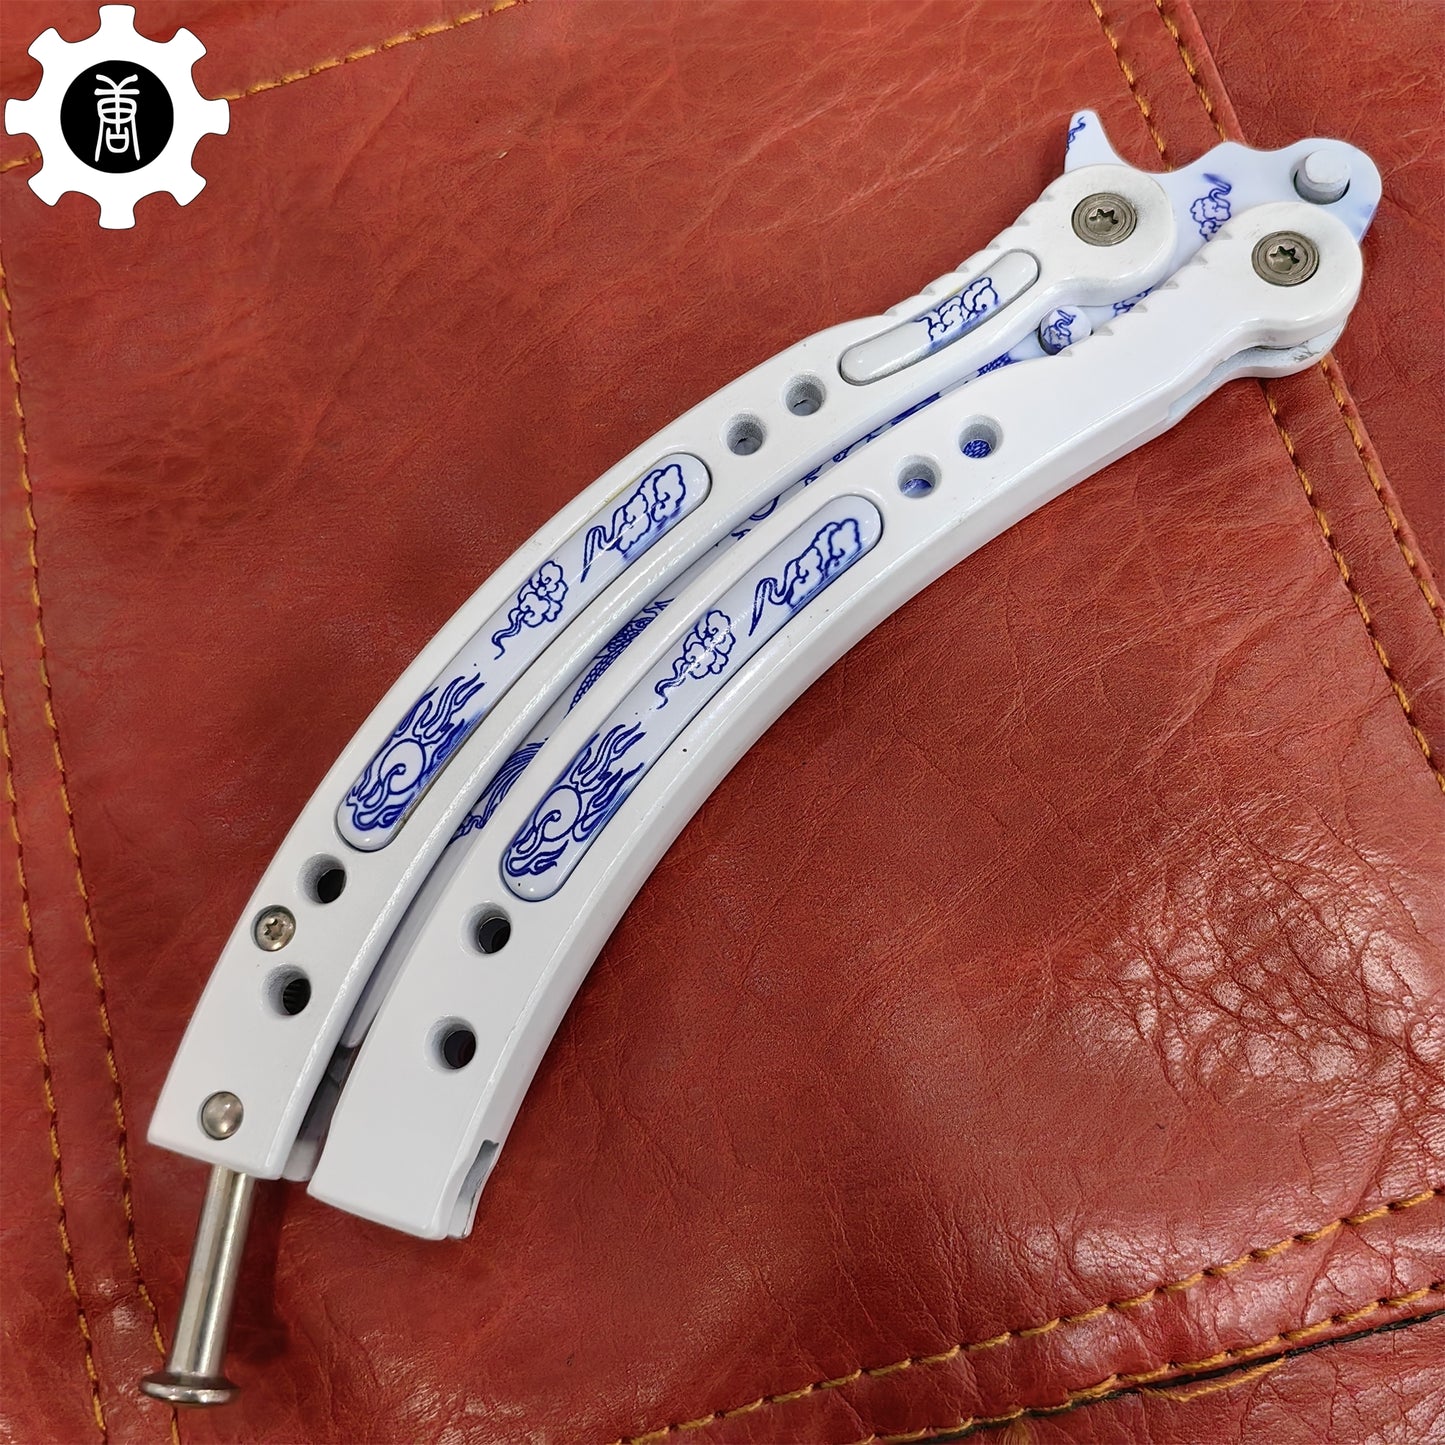 Game Butterfly Knife Azure Dragon Balisong White Handle